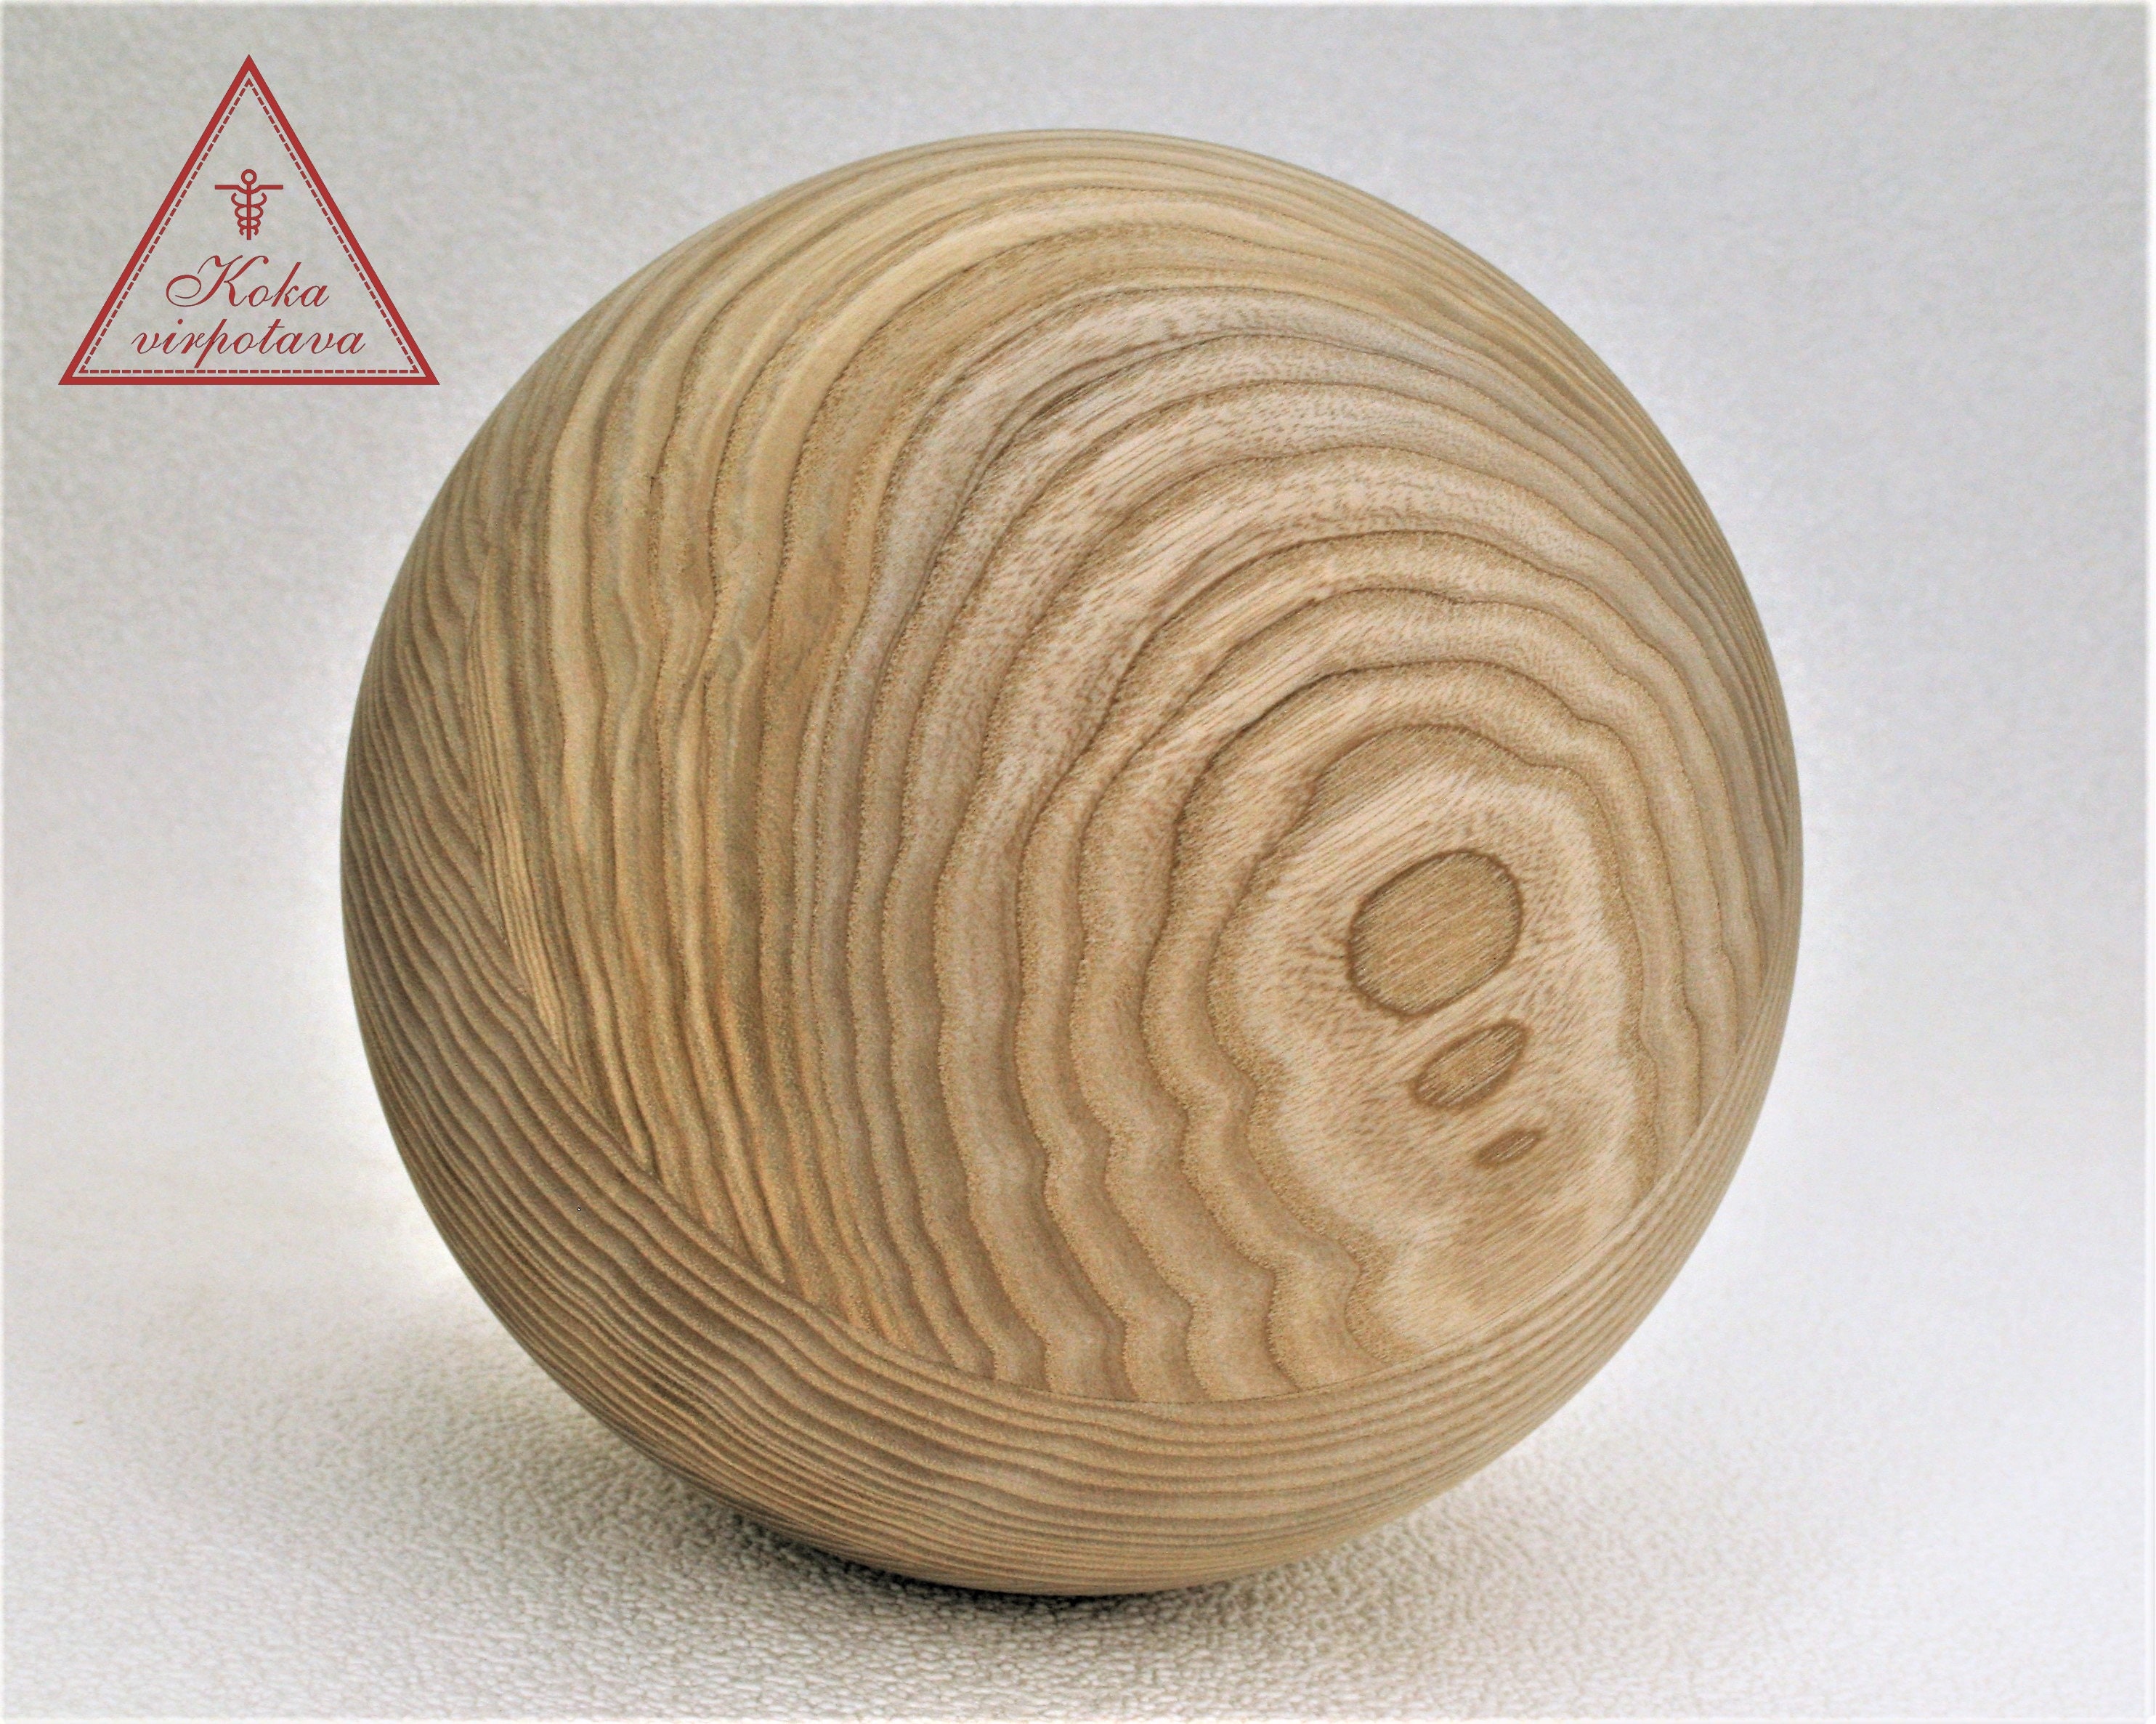 Wood Ball 165 Mm Large Wood Ball Wood Sphere 165 Mm Wood Ball 6,5 Turned Wooden  Ball Wood Ball Ornament Unfinished Wood Ball Quality Ball -  Norway